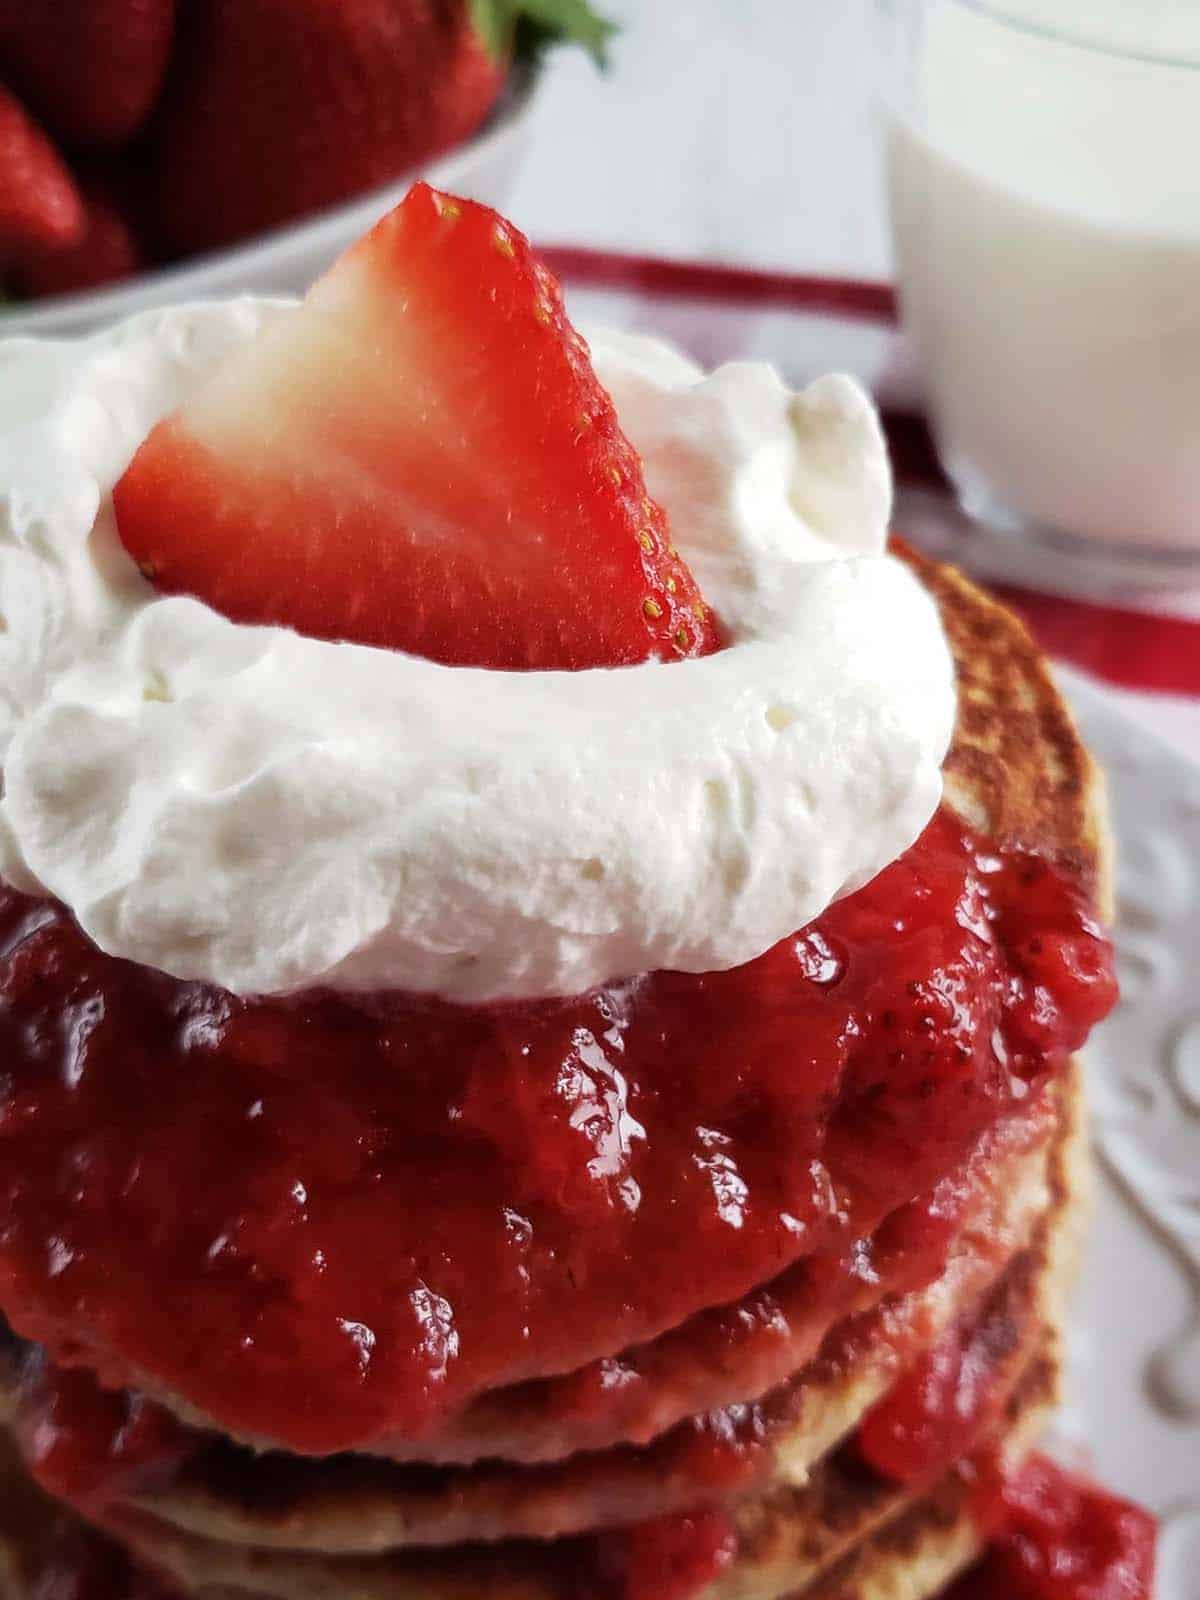 Stack or oatmeal strawberry pancakes topped with whipped cream and strawberries.